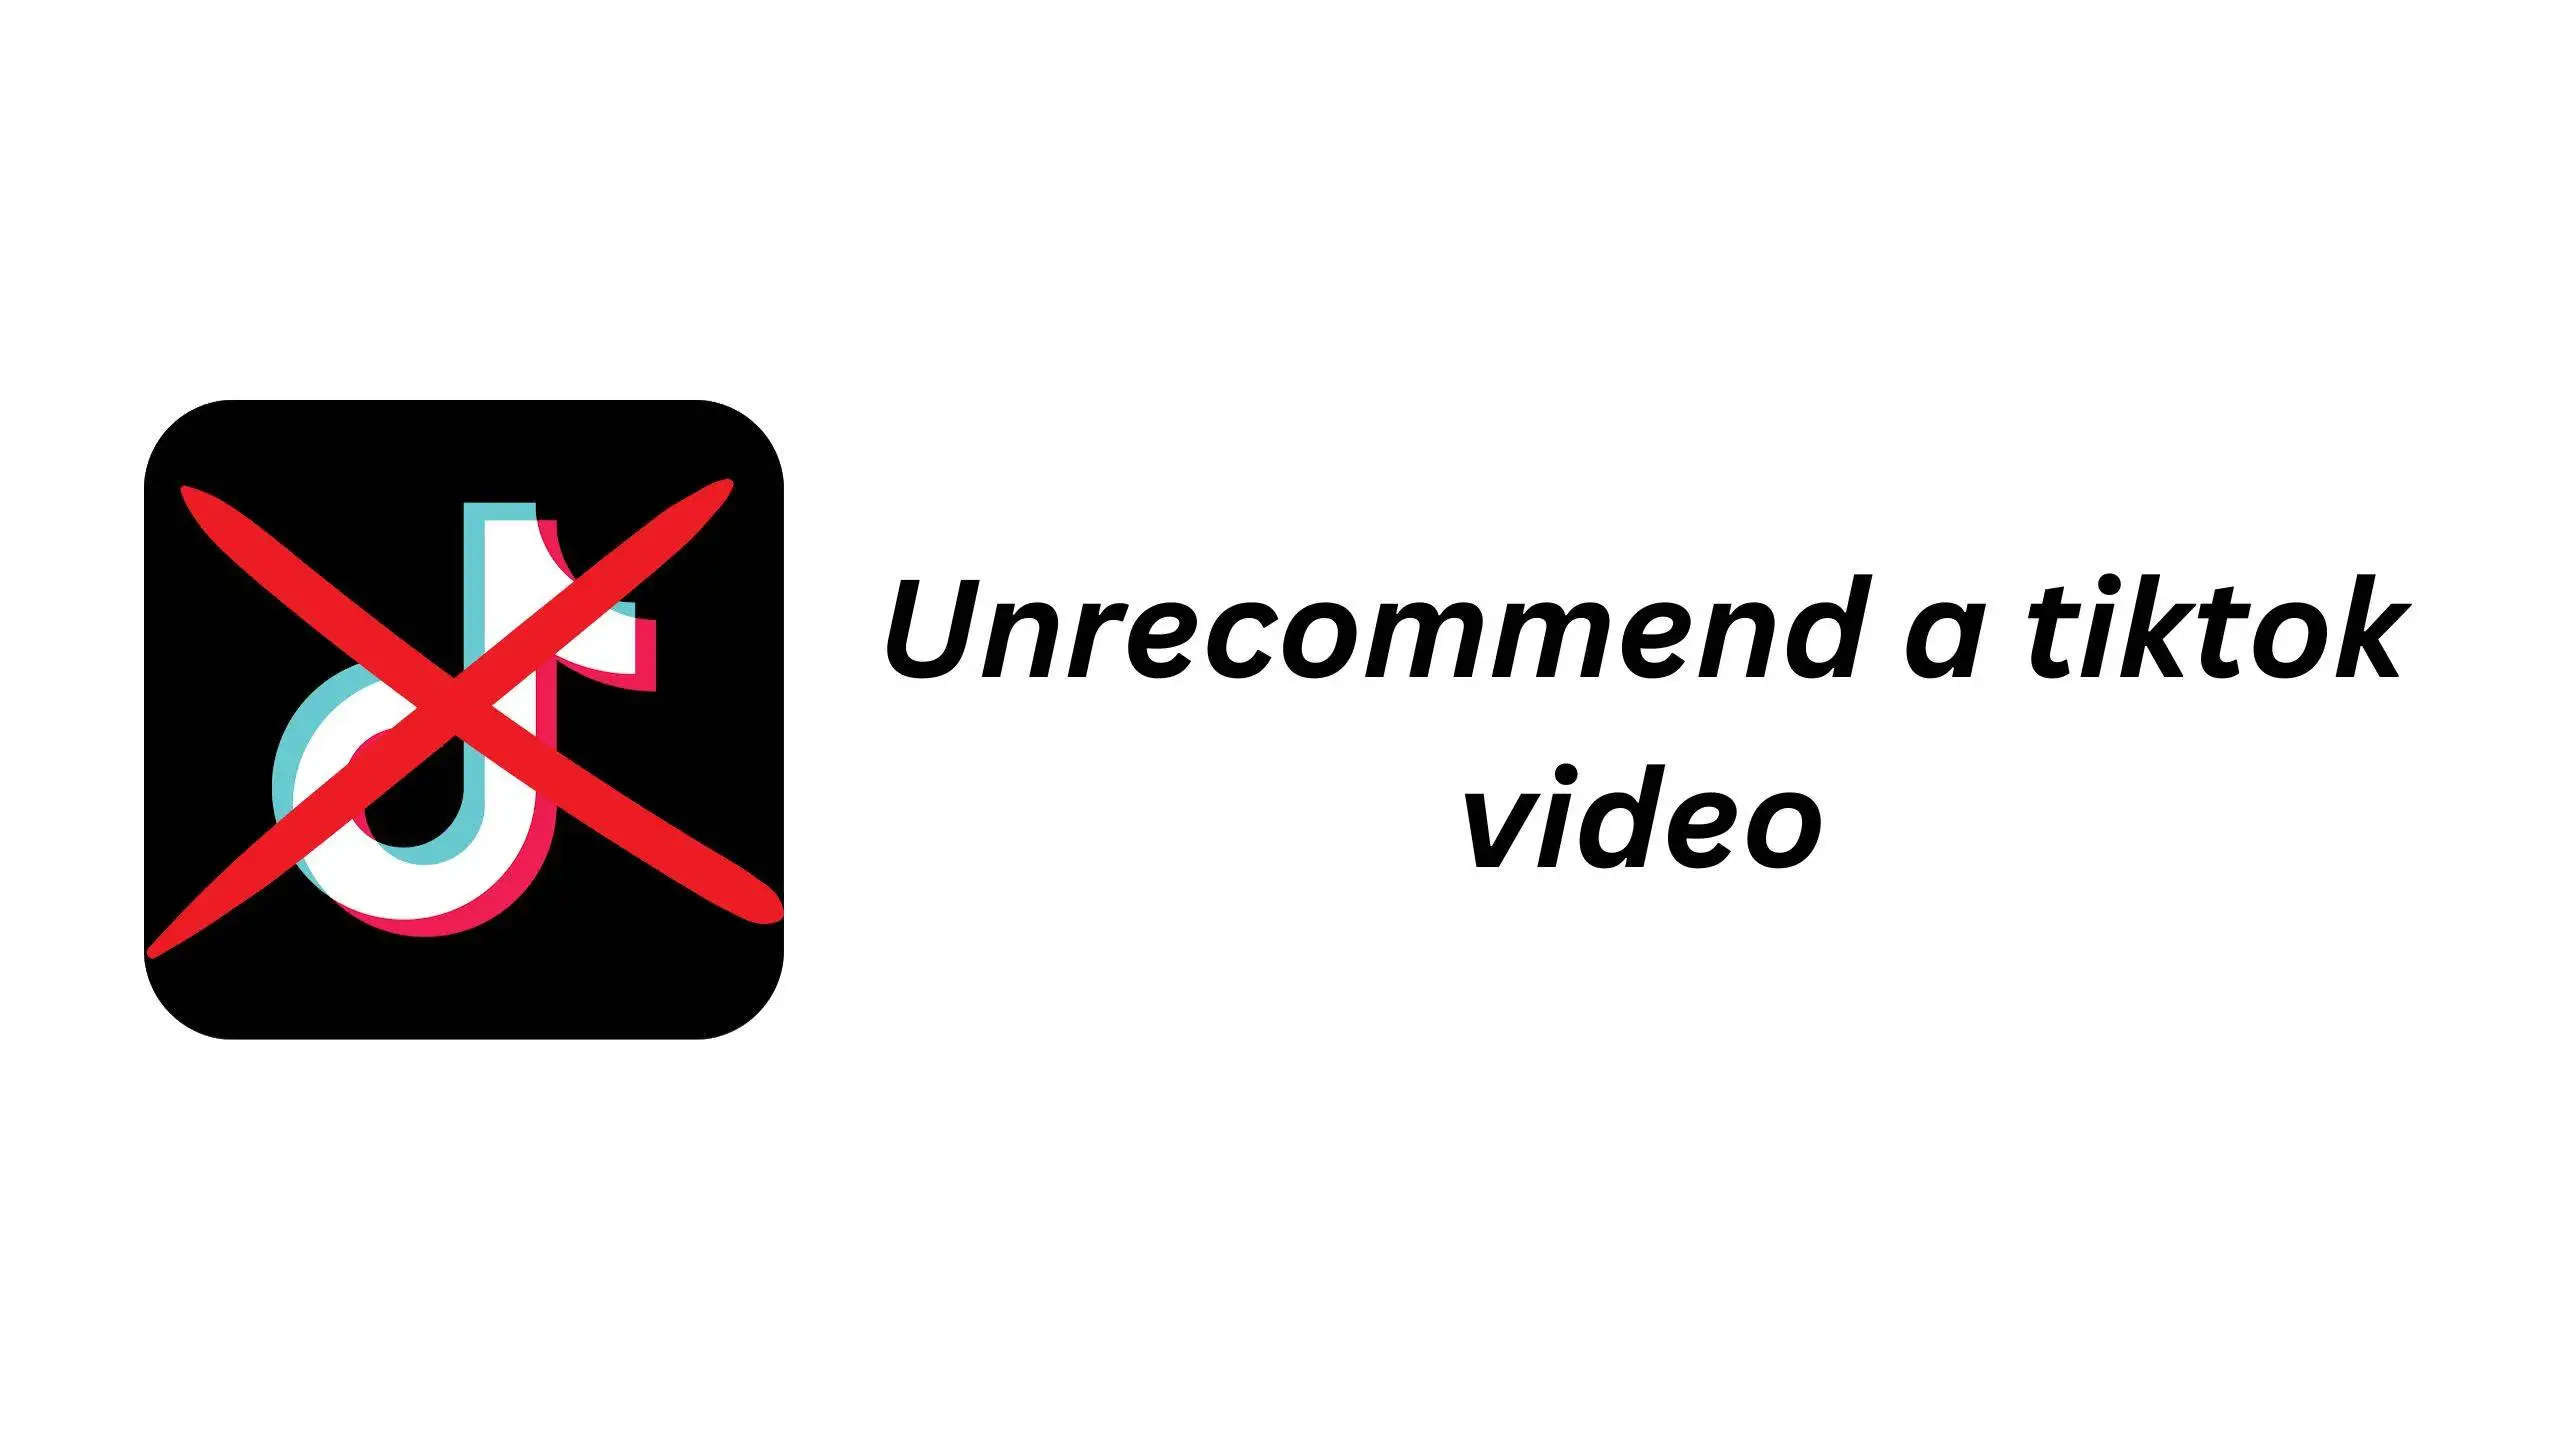 How to unrecommend a tiktok video that you accidentally recommended on tiktok